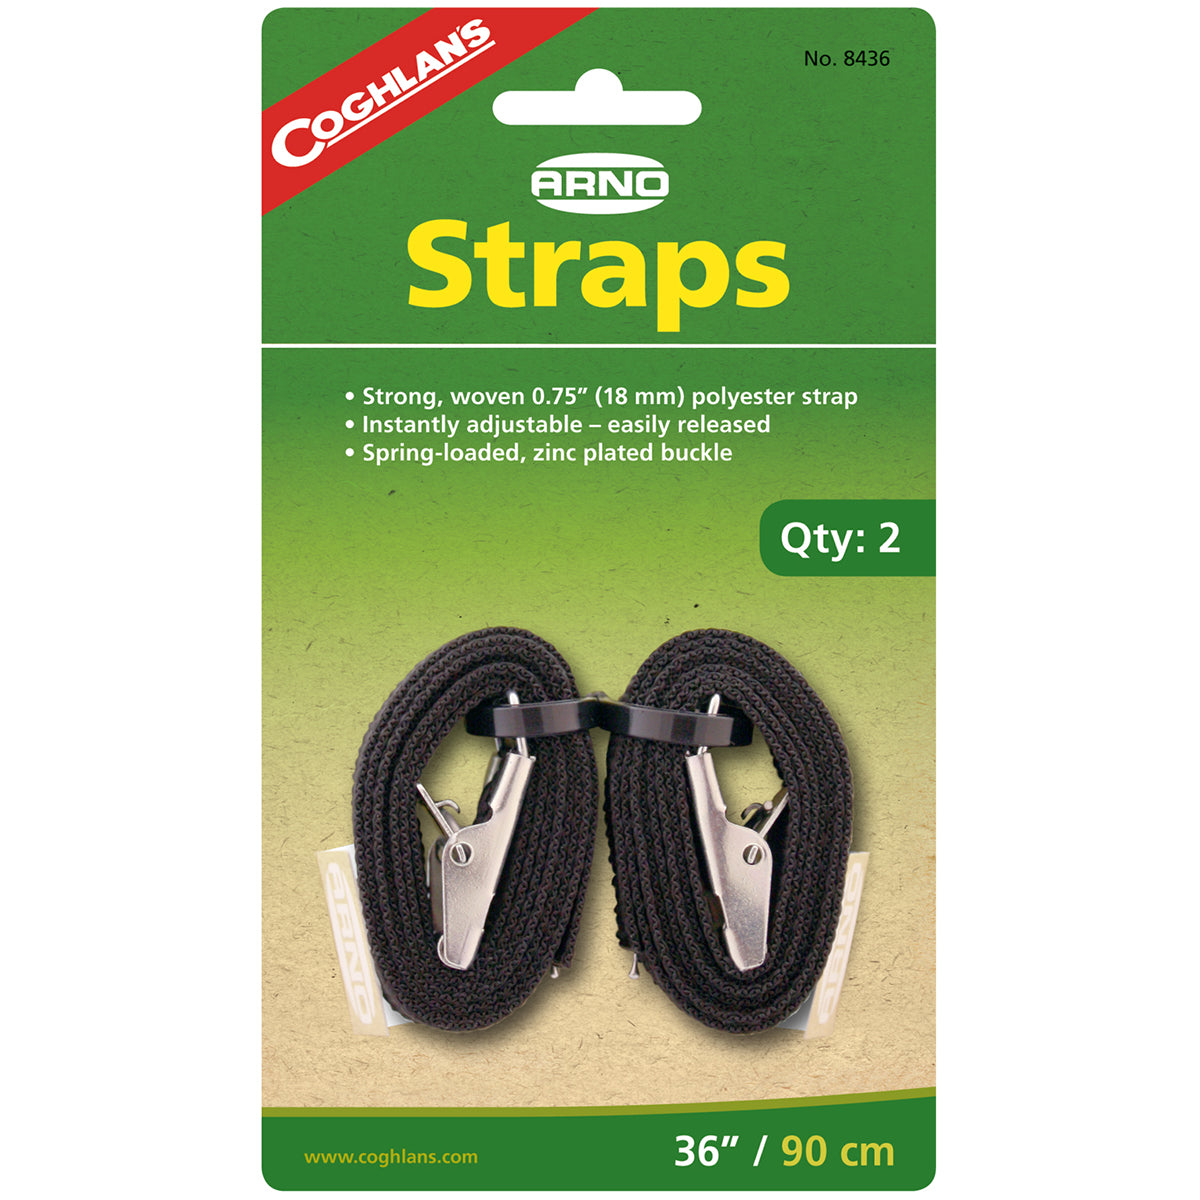 Coghlan's 36" Arno Straps (2 Count), Woven Polyester, Camping Hiking Survival Coghlan's